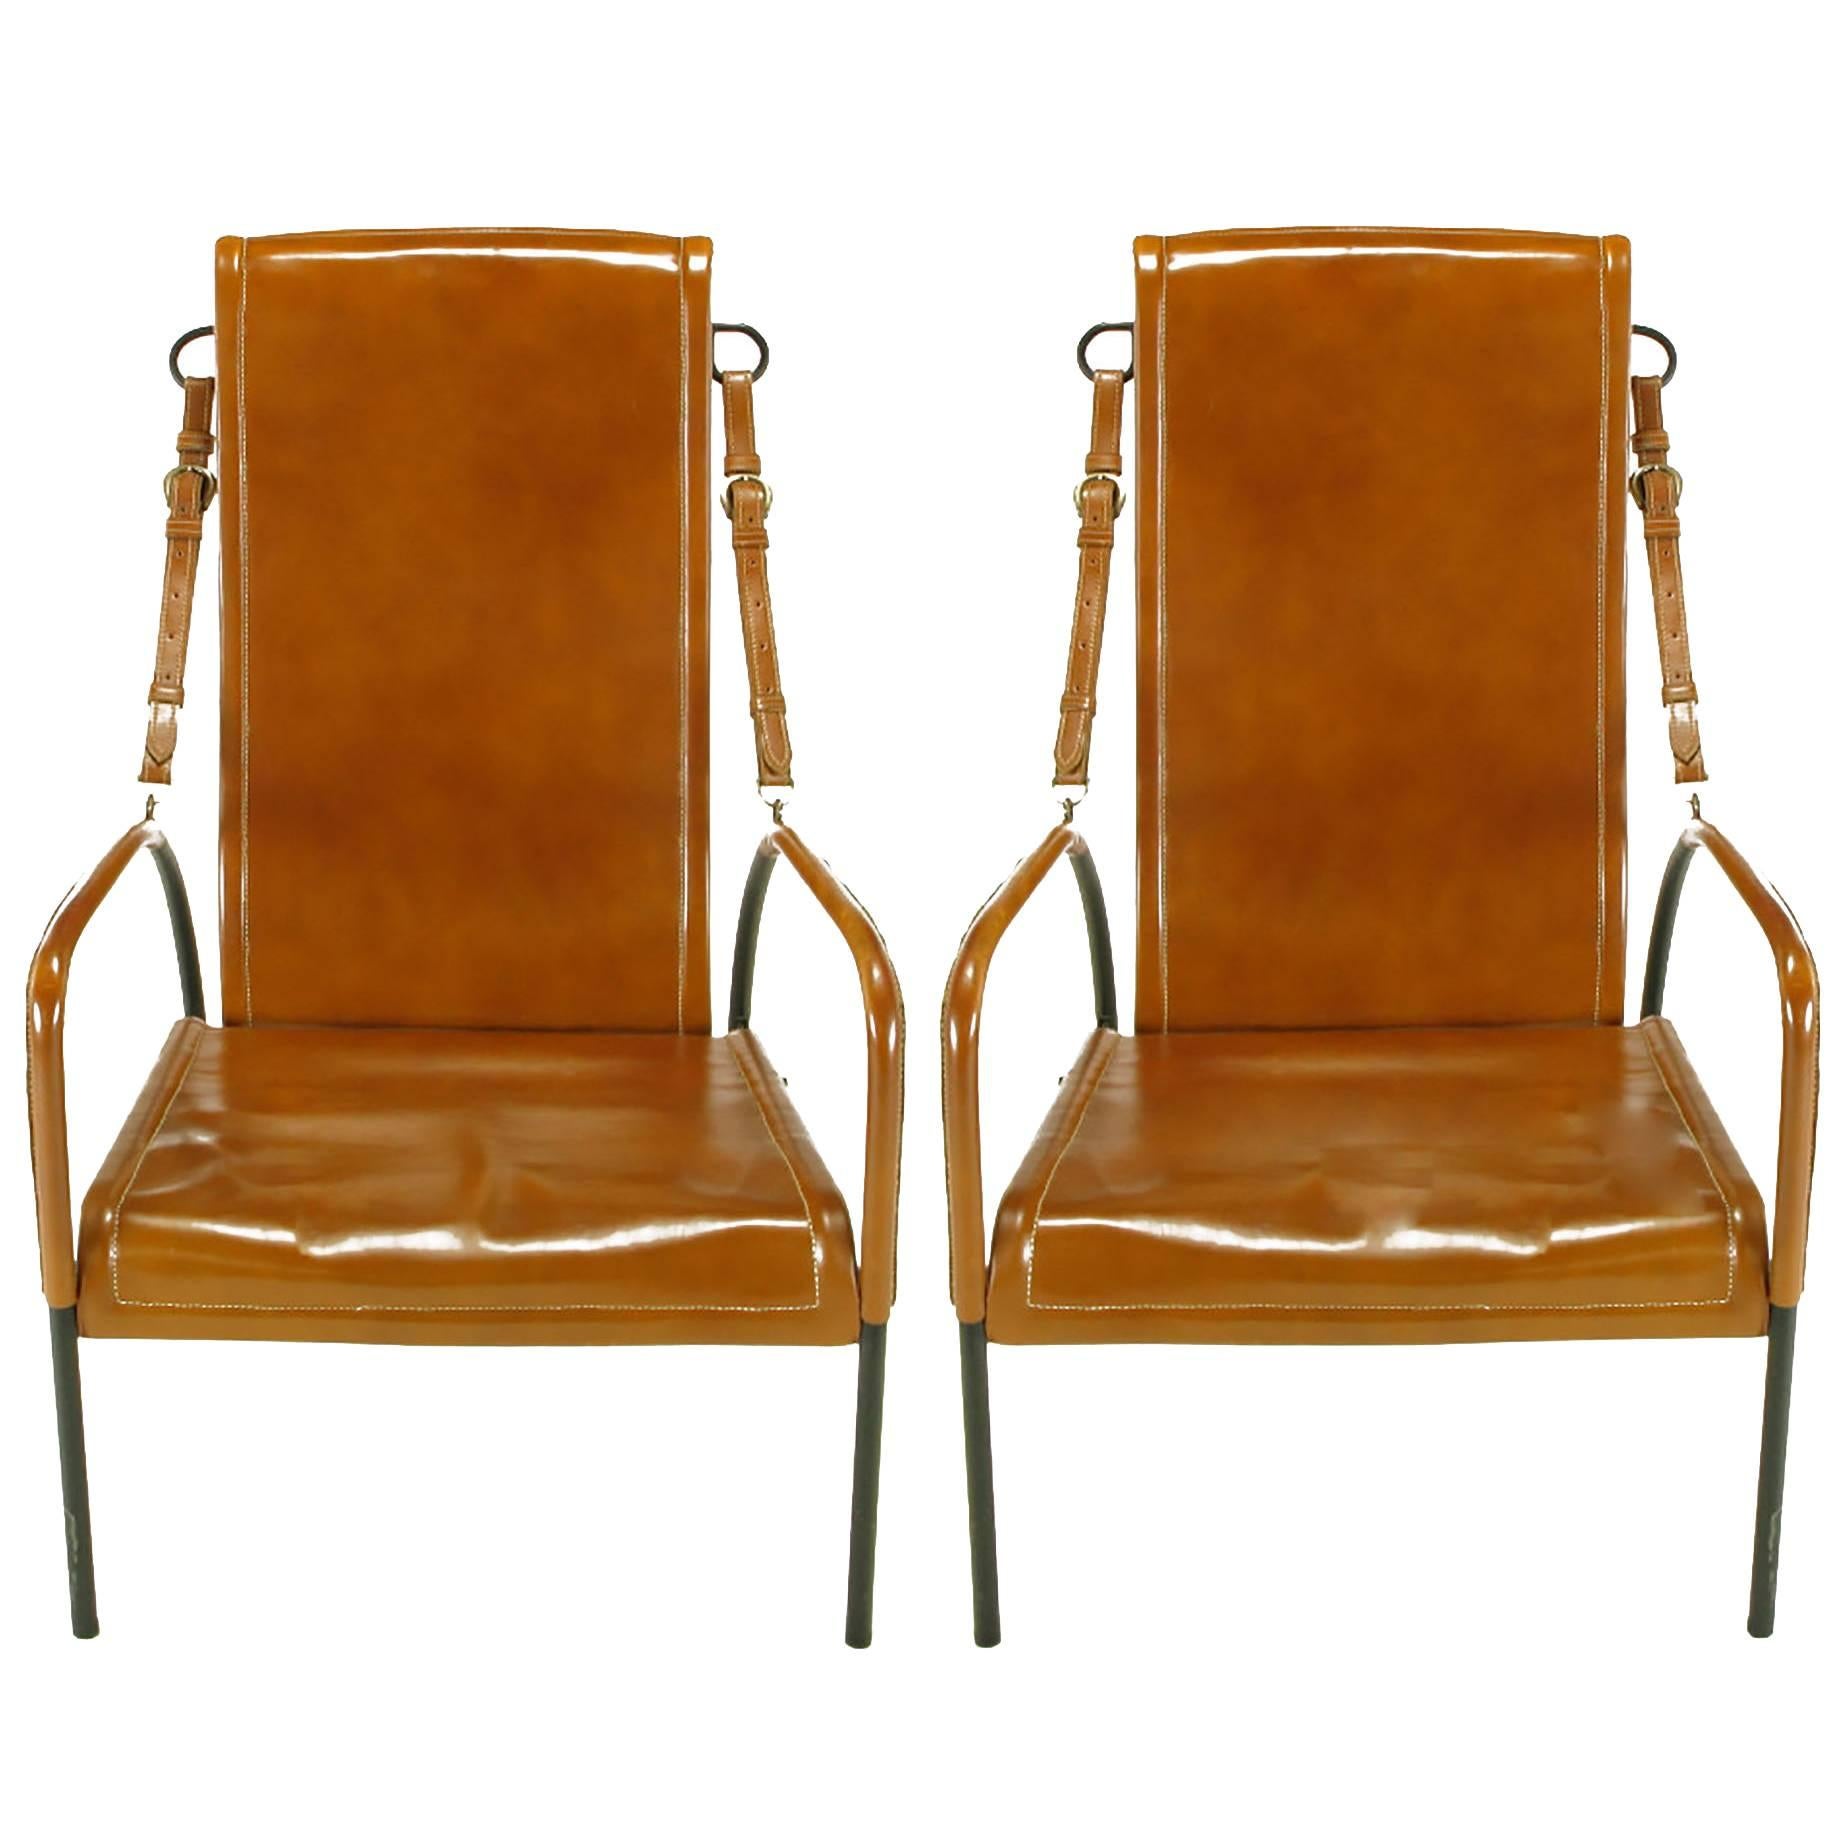 Pair of Custom Leather and Wrought Iron Lounge Chairs after Jacques Adnet